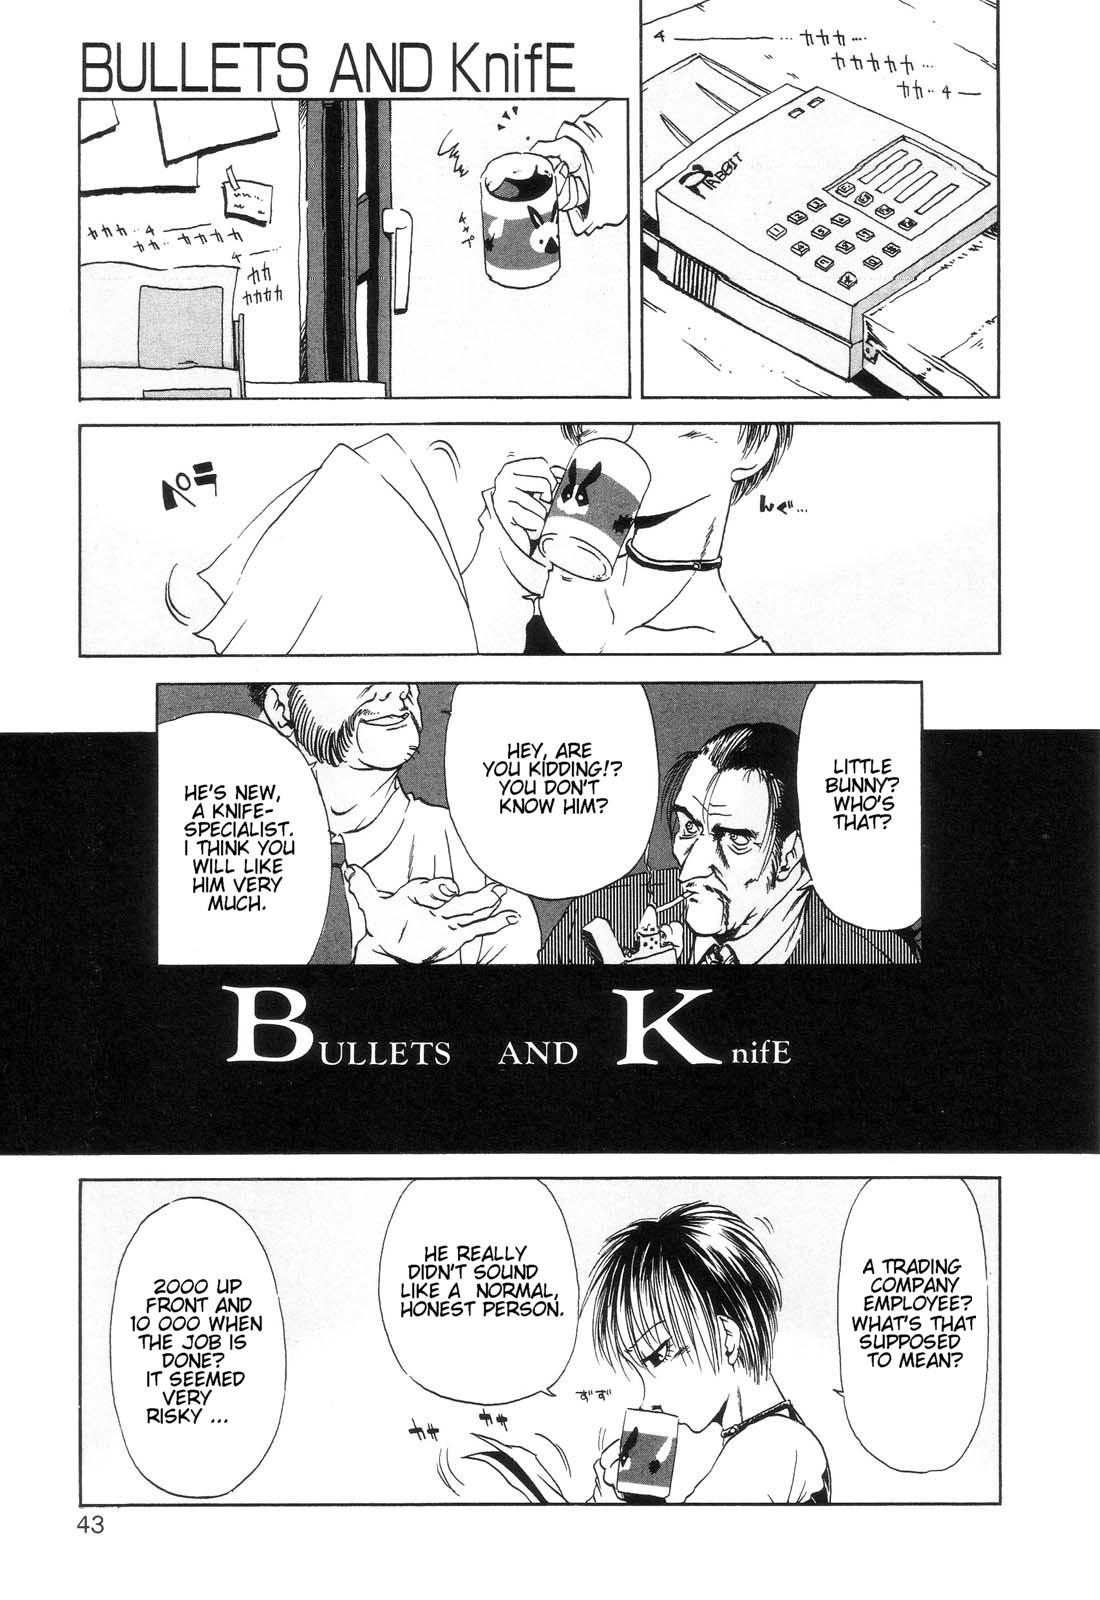 Yoga Akiba Oze - Bullets and Knife Soapy - Page 1